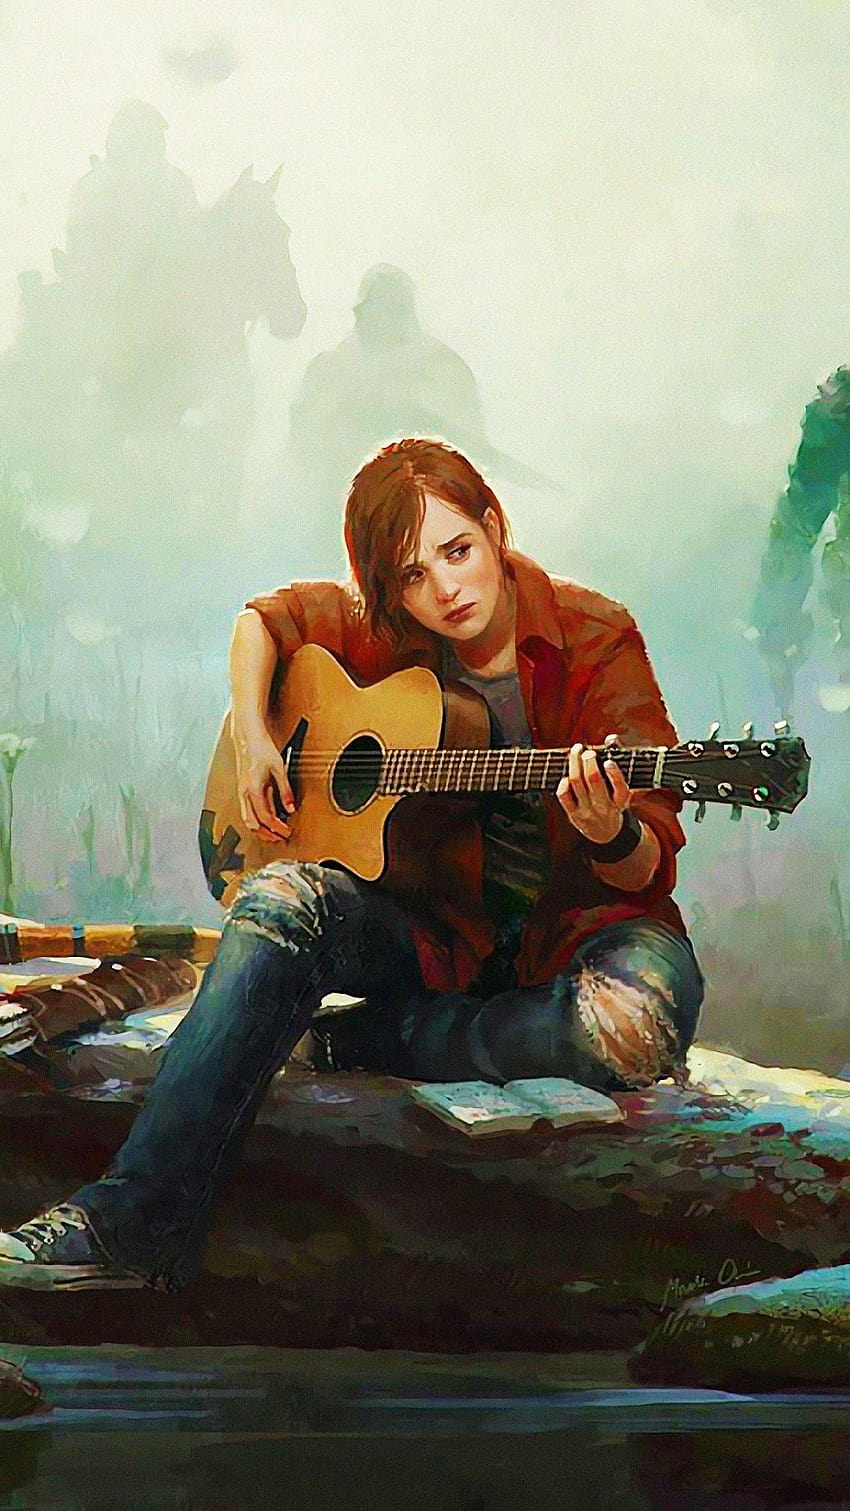 The Last of Us Part 2 Ellie Playing Guitar, the last of us 2 iphone xr wallpaper ponsel HD